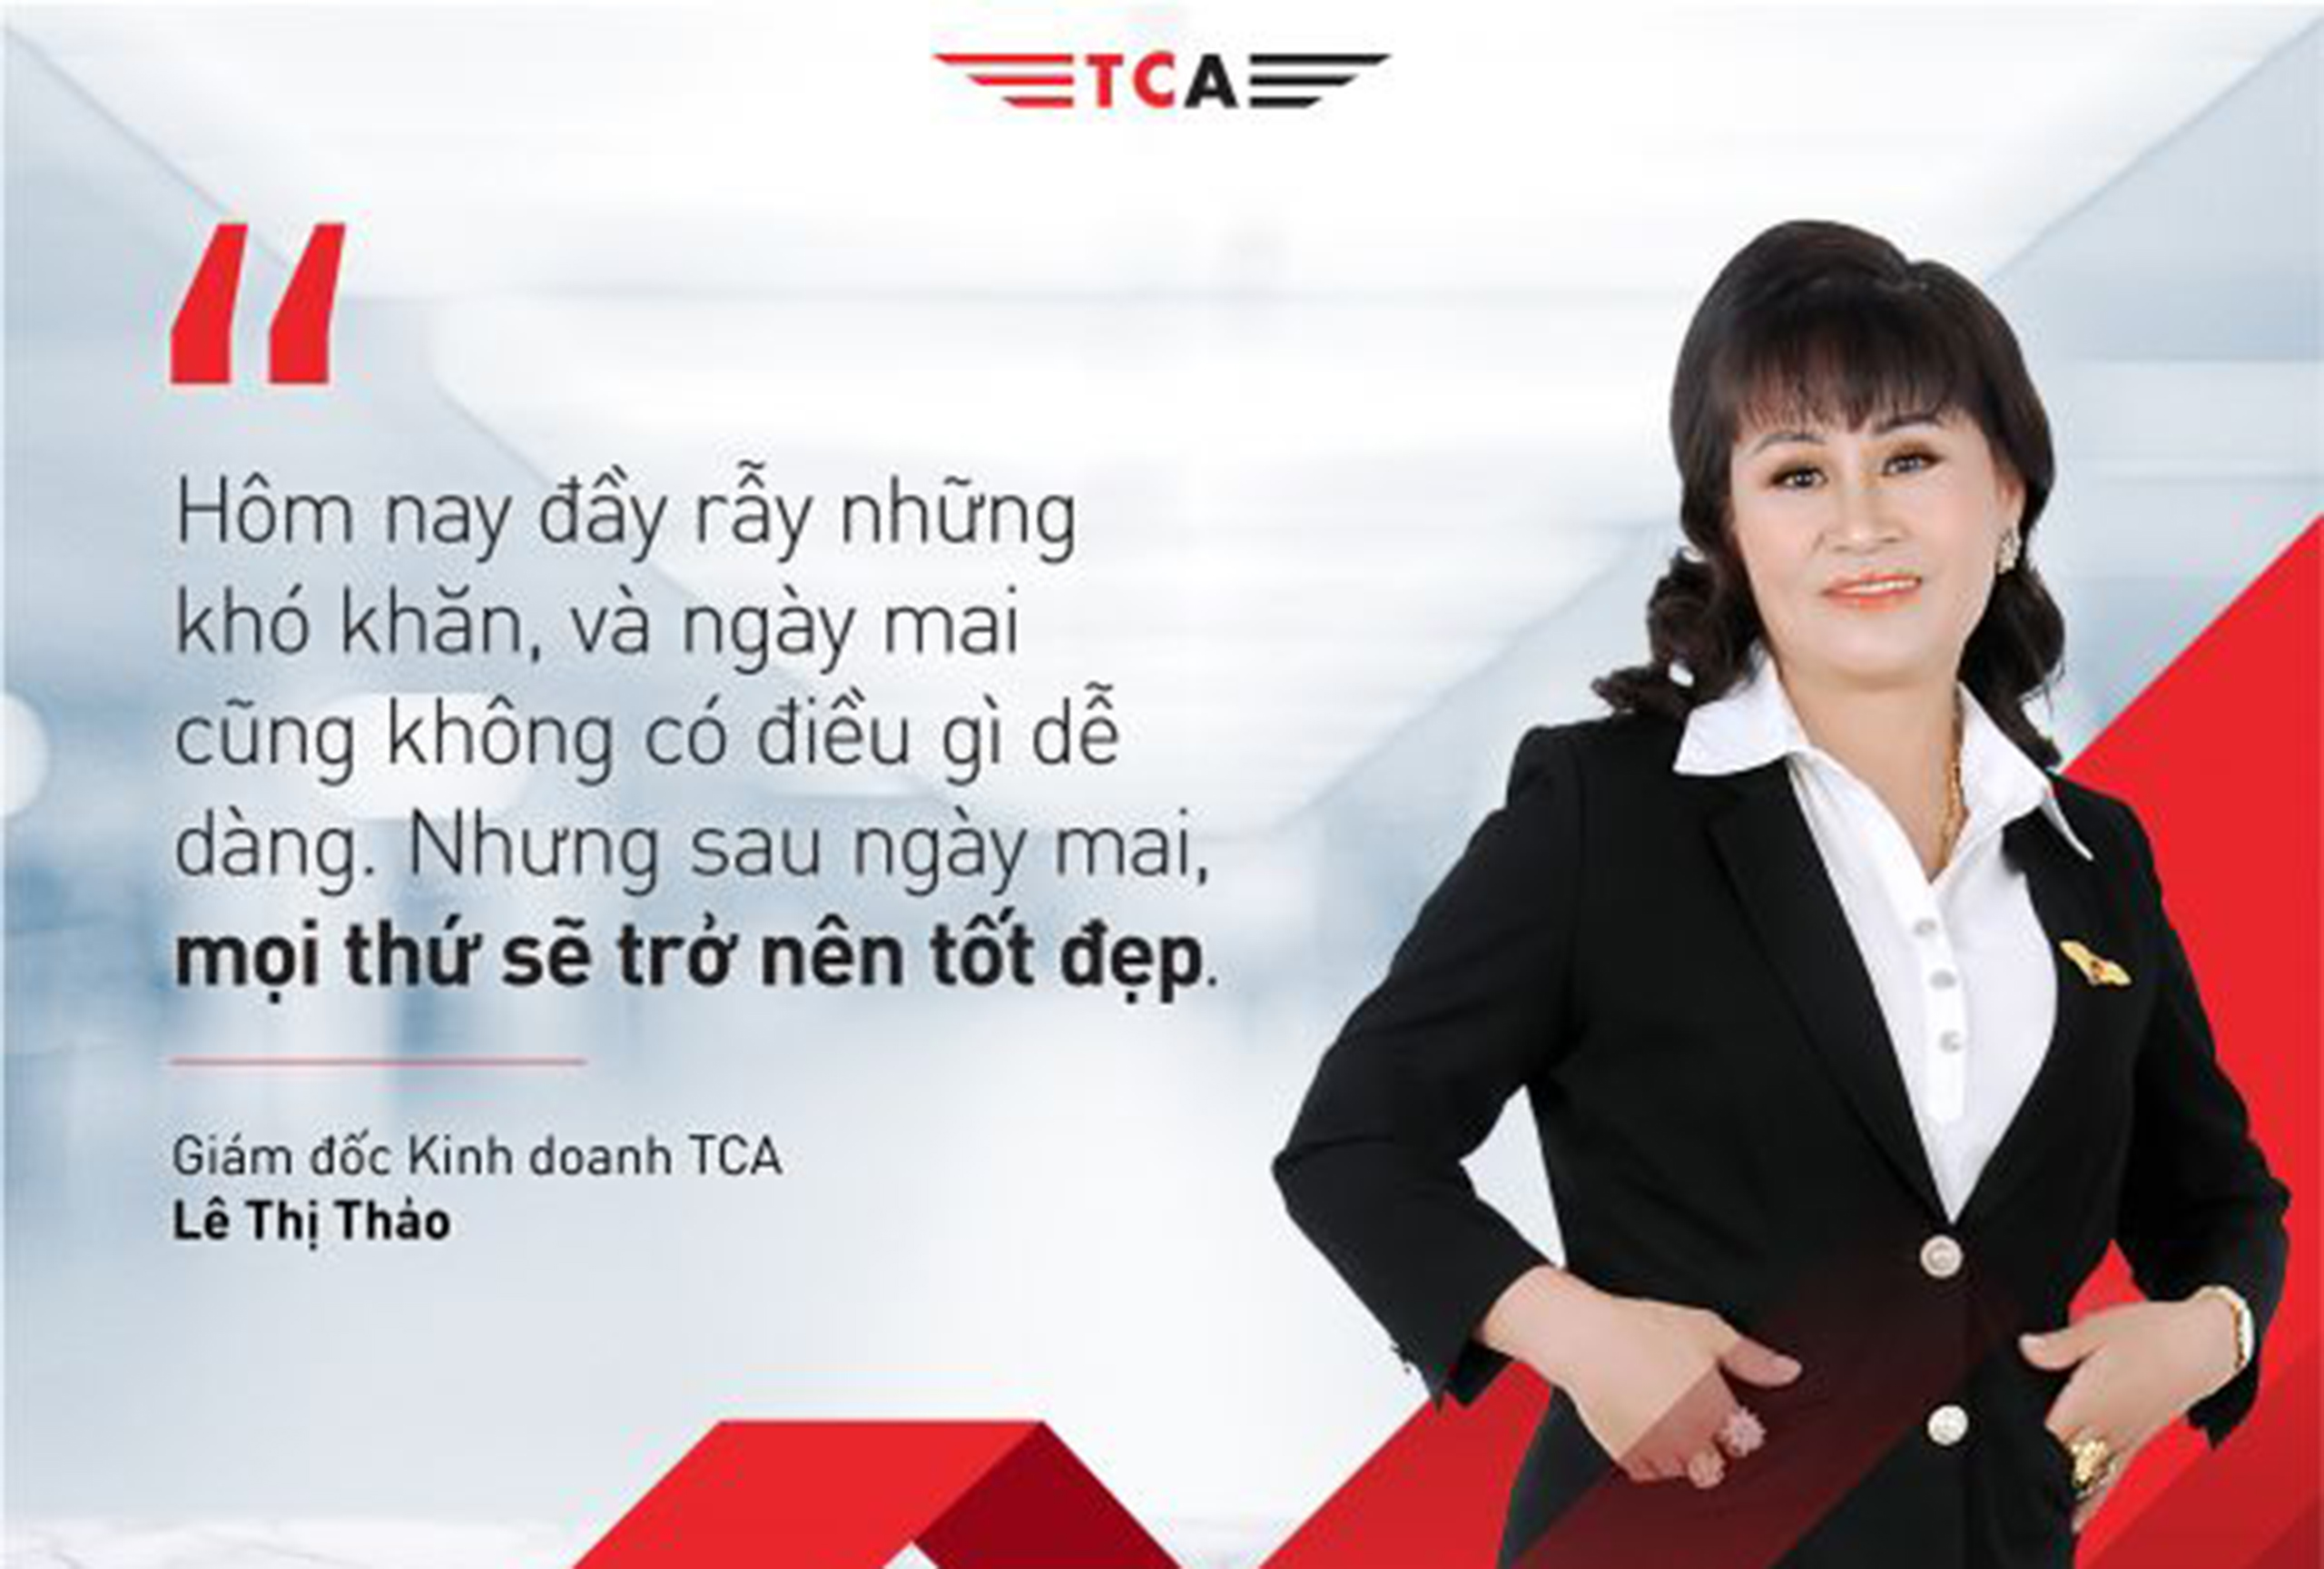 Le Thi Thao Quotes Web 1 1 600x450 1